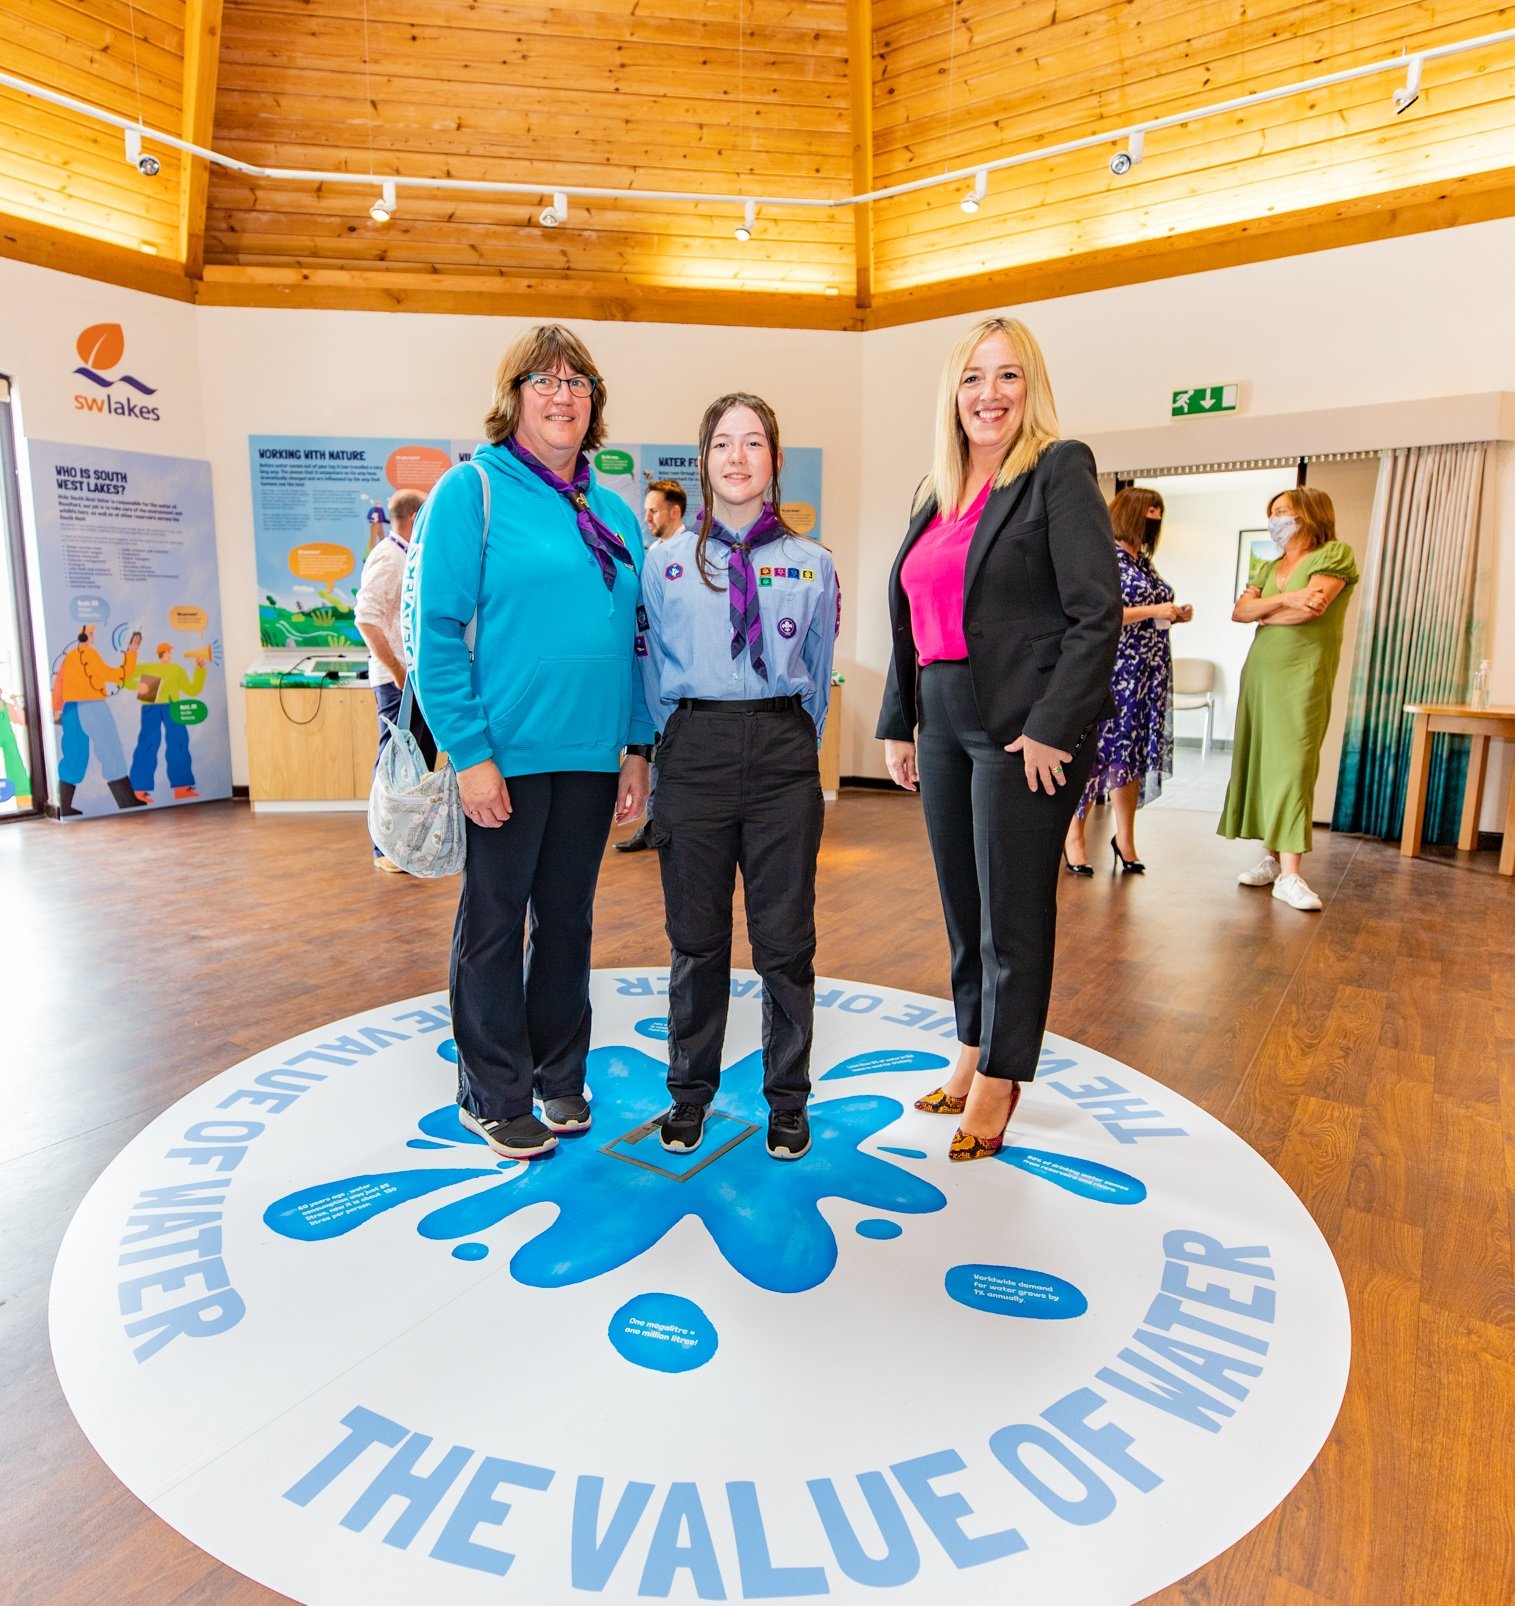 Children to discover the value of water with exciting new educational visitor centre